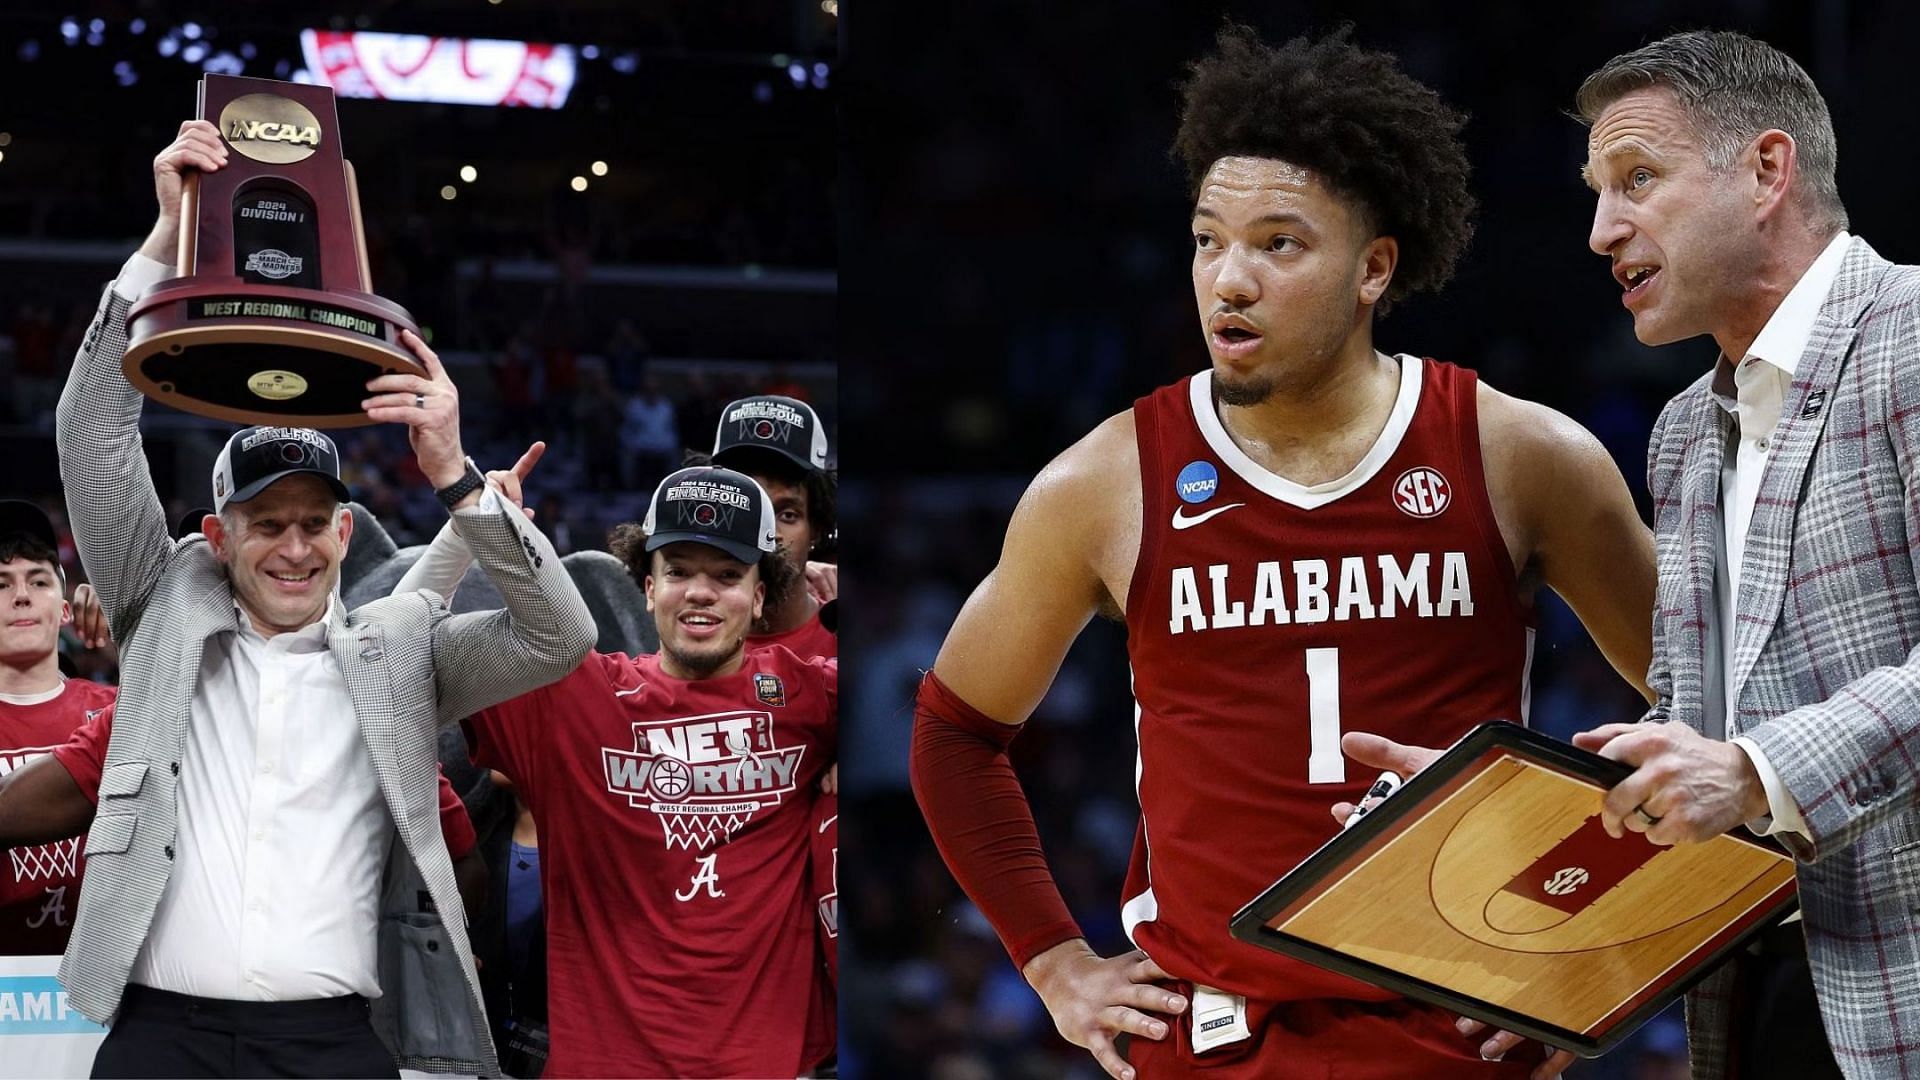 Nate Oats became the first Alabama coach to guide the Crimson Tide to the NCAA Final Four.